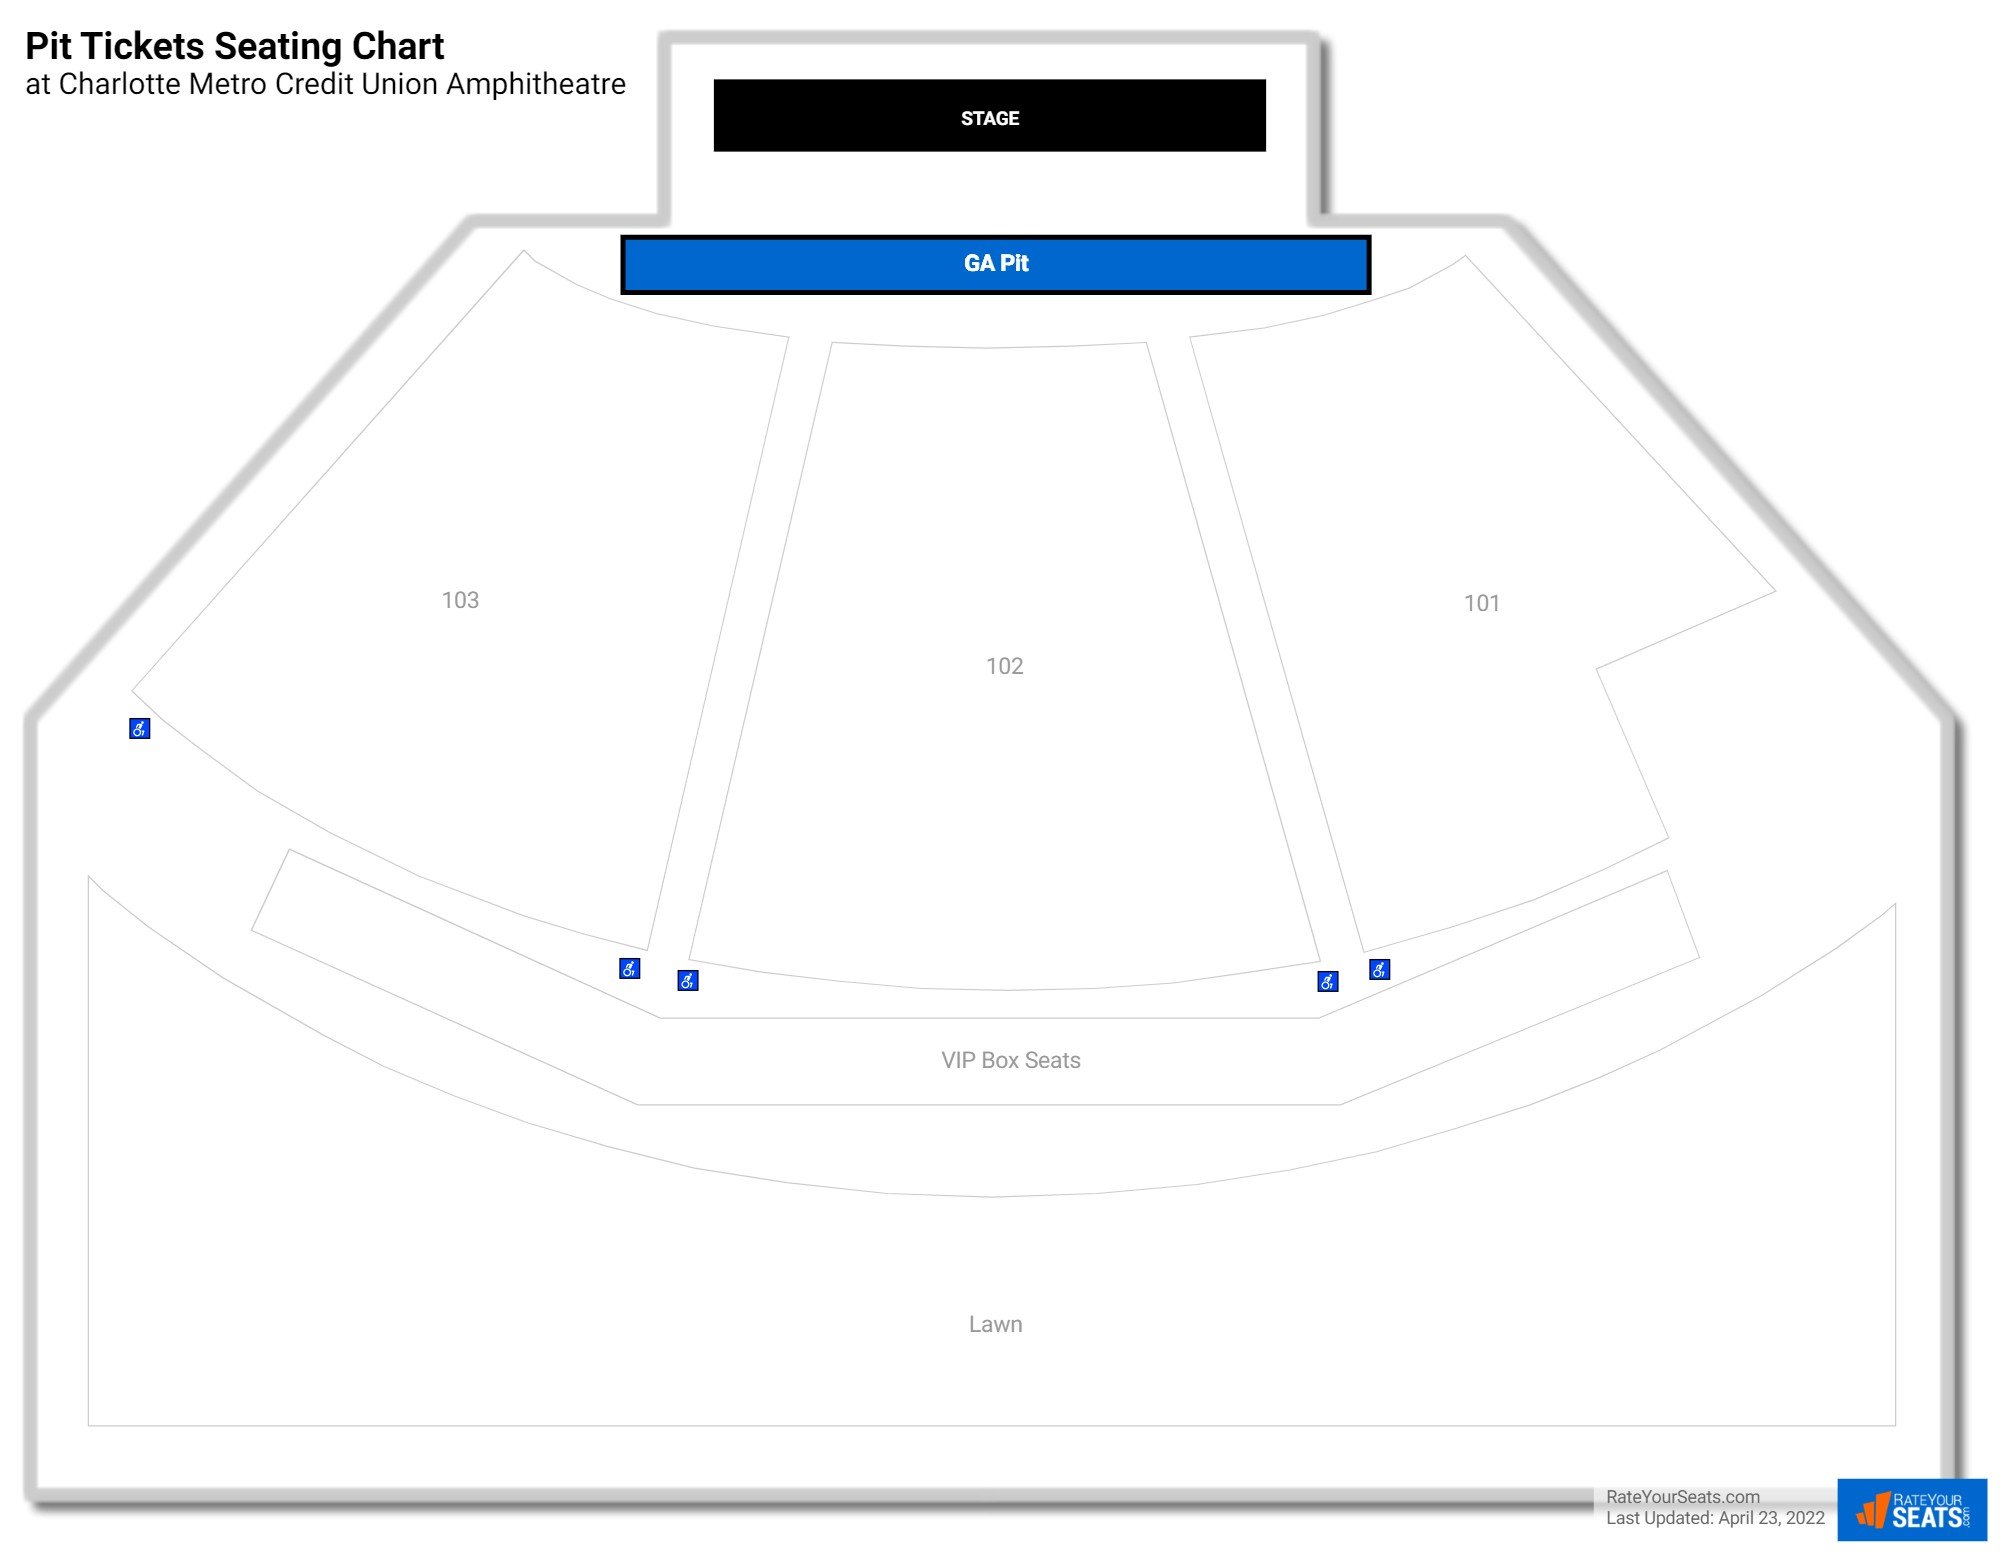 Concert Pit Tickets Seating Chart at Charlotte Metro Credit Union Amphitheatre